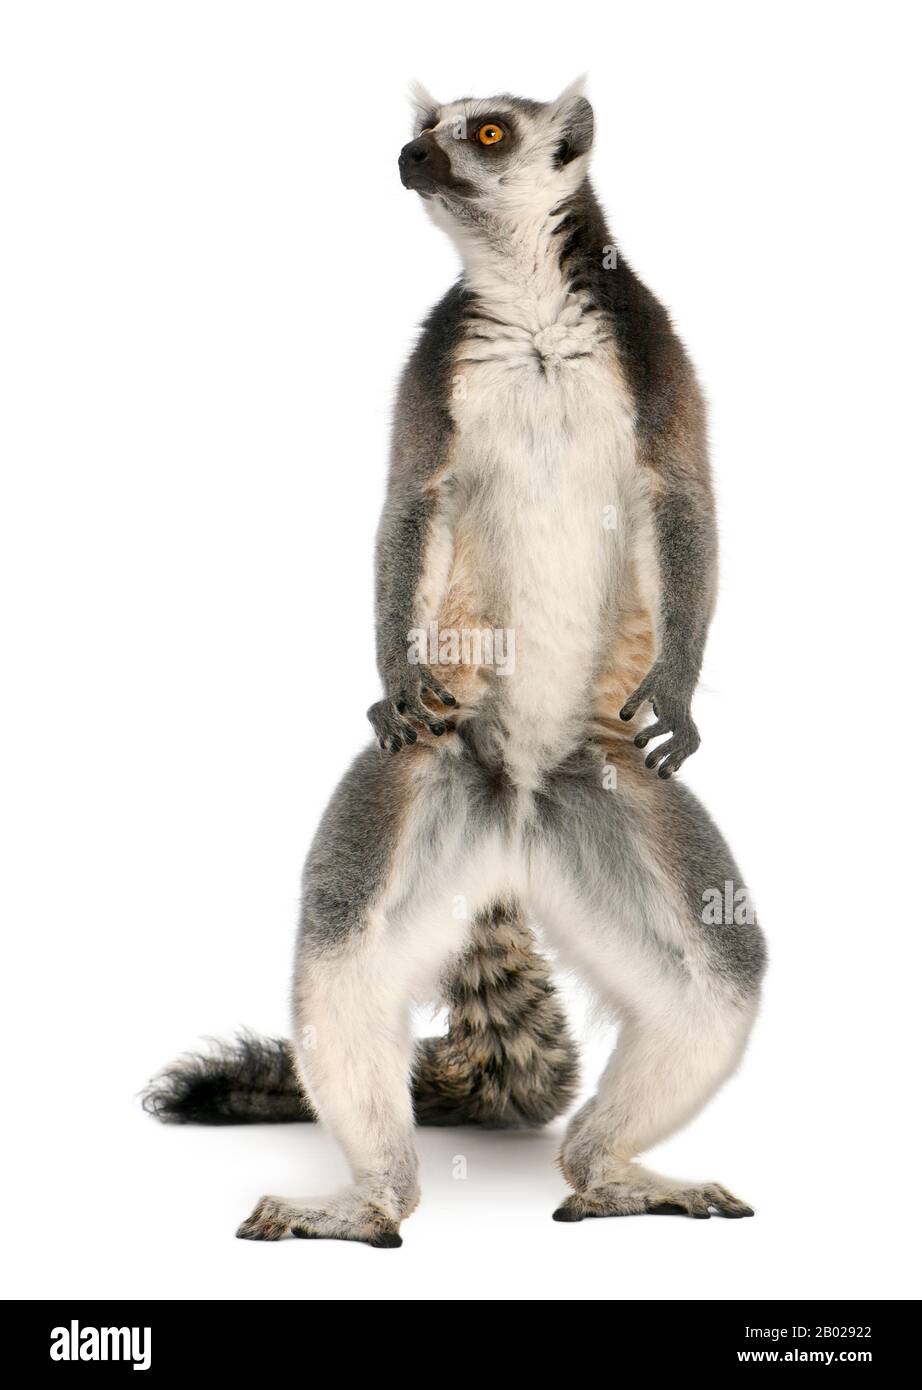 Ring-tailed lemur, Lemur catta, 7 years old, standing in front of white background Stock Photo